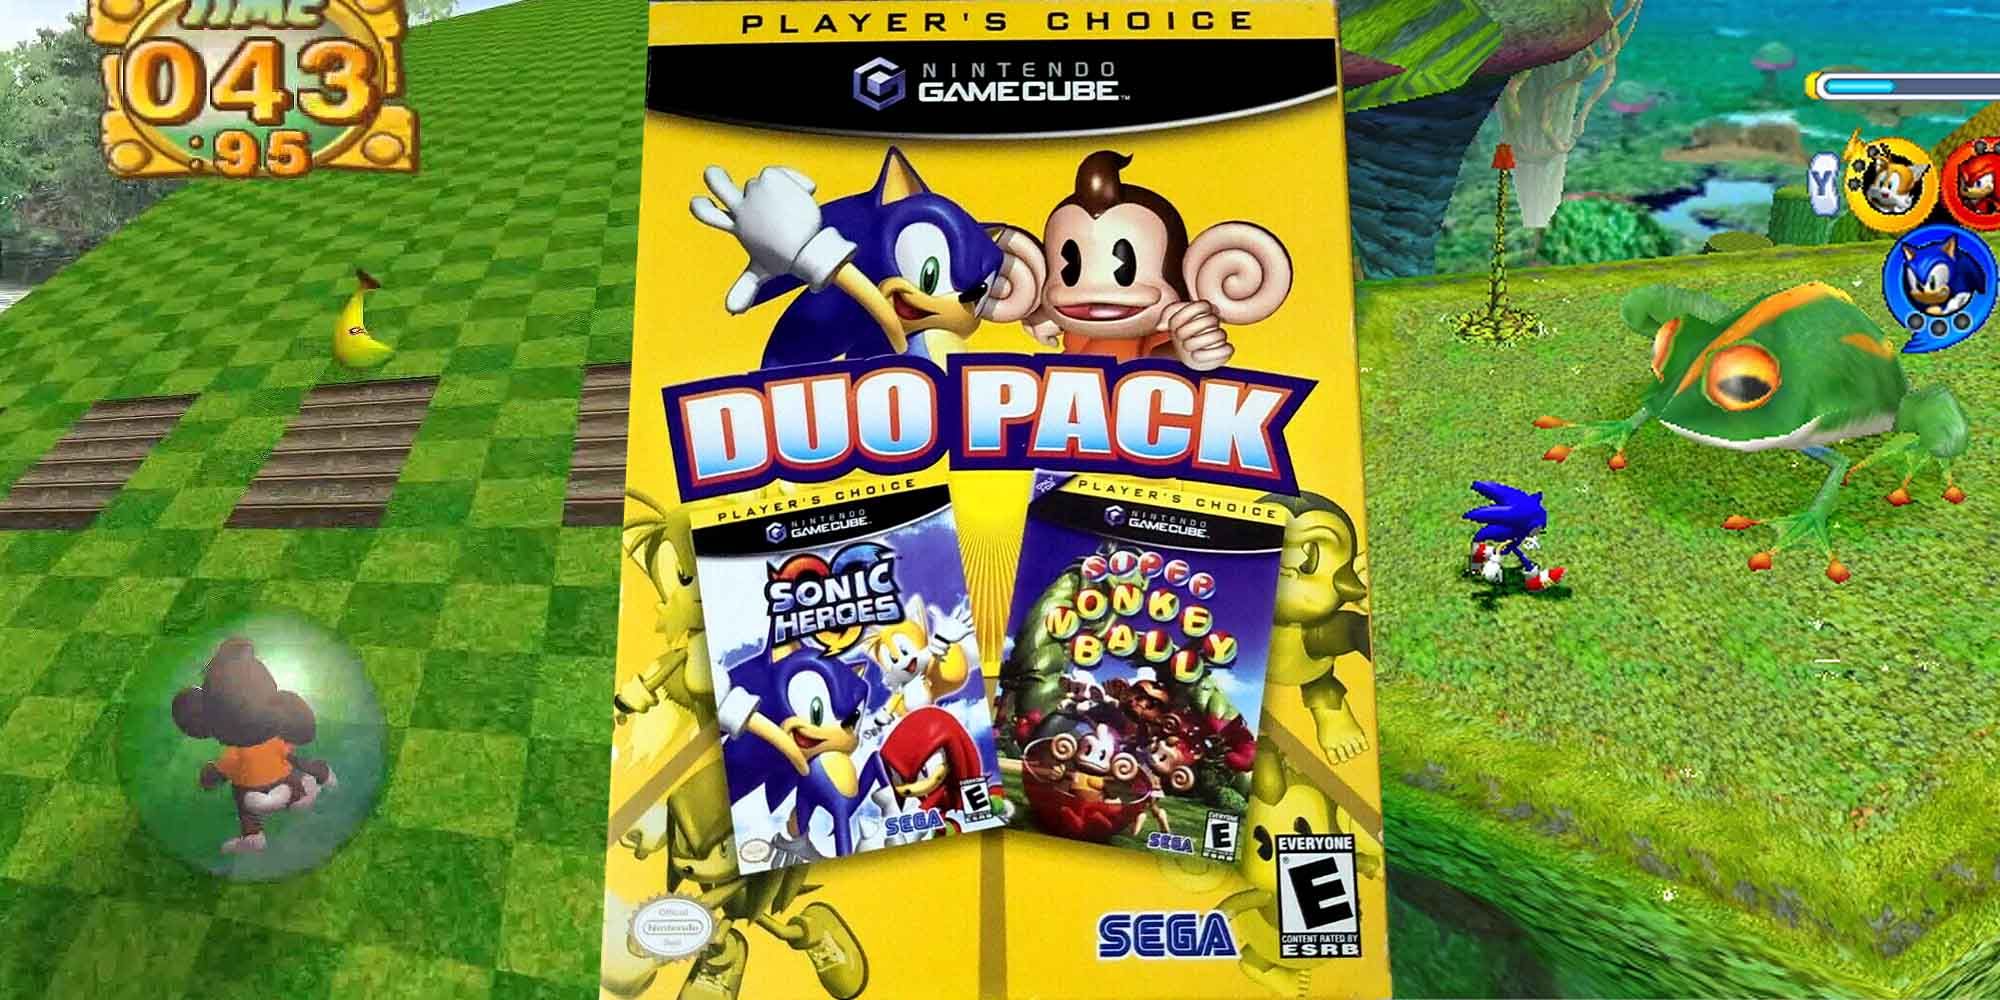 Sonic Monkey Ball Duo Pack for the Nintendo Gamecube